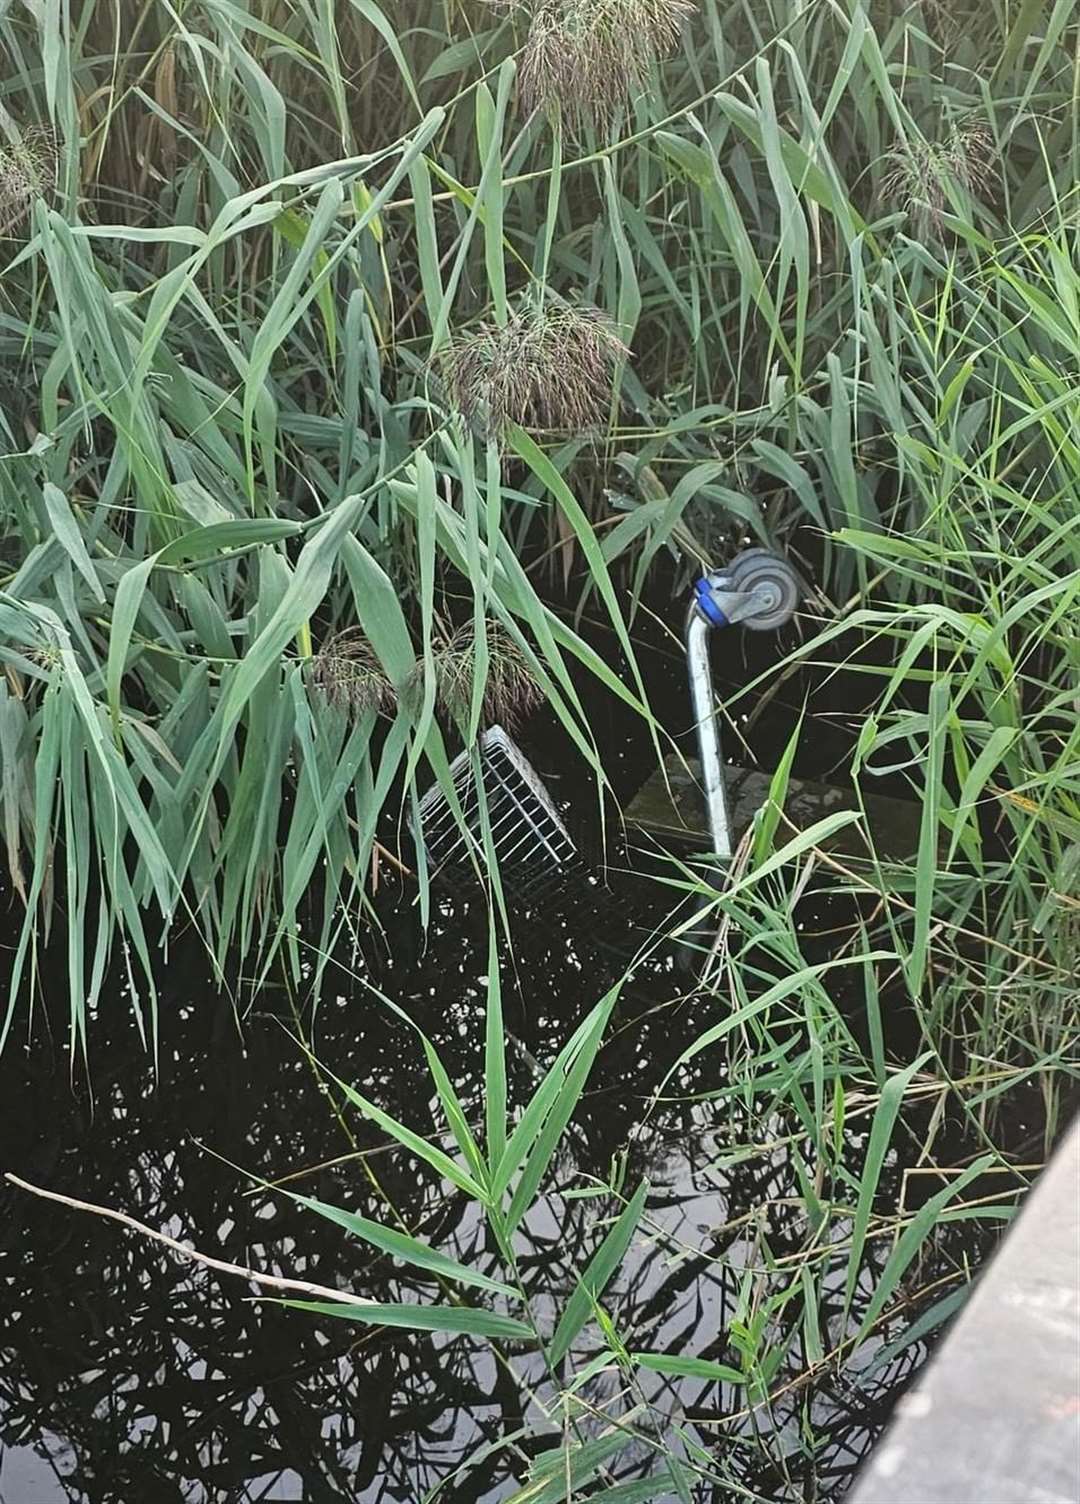 A trolley has been submerged in the lake